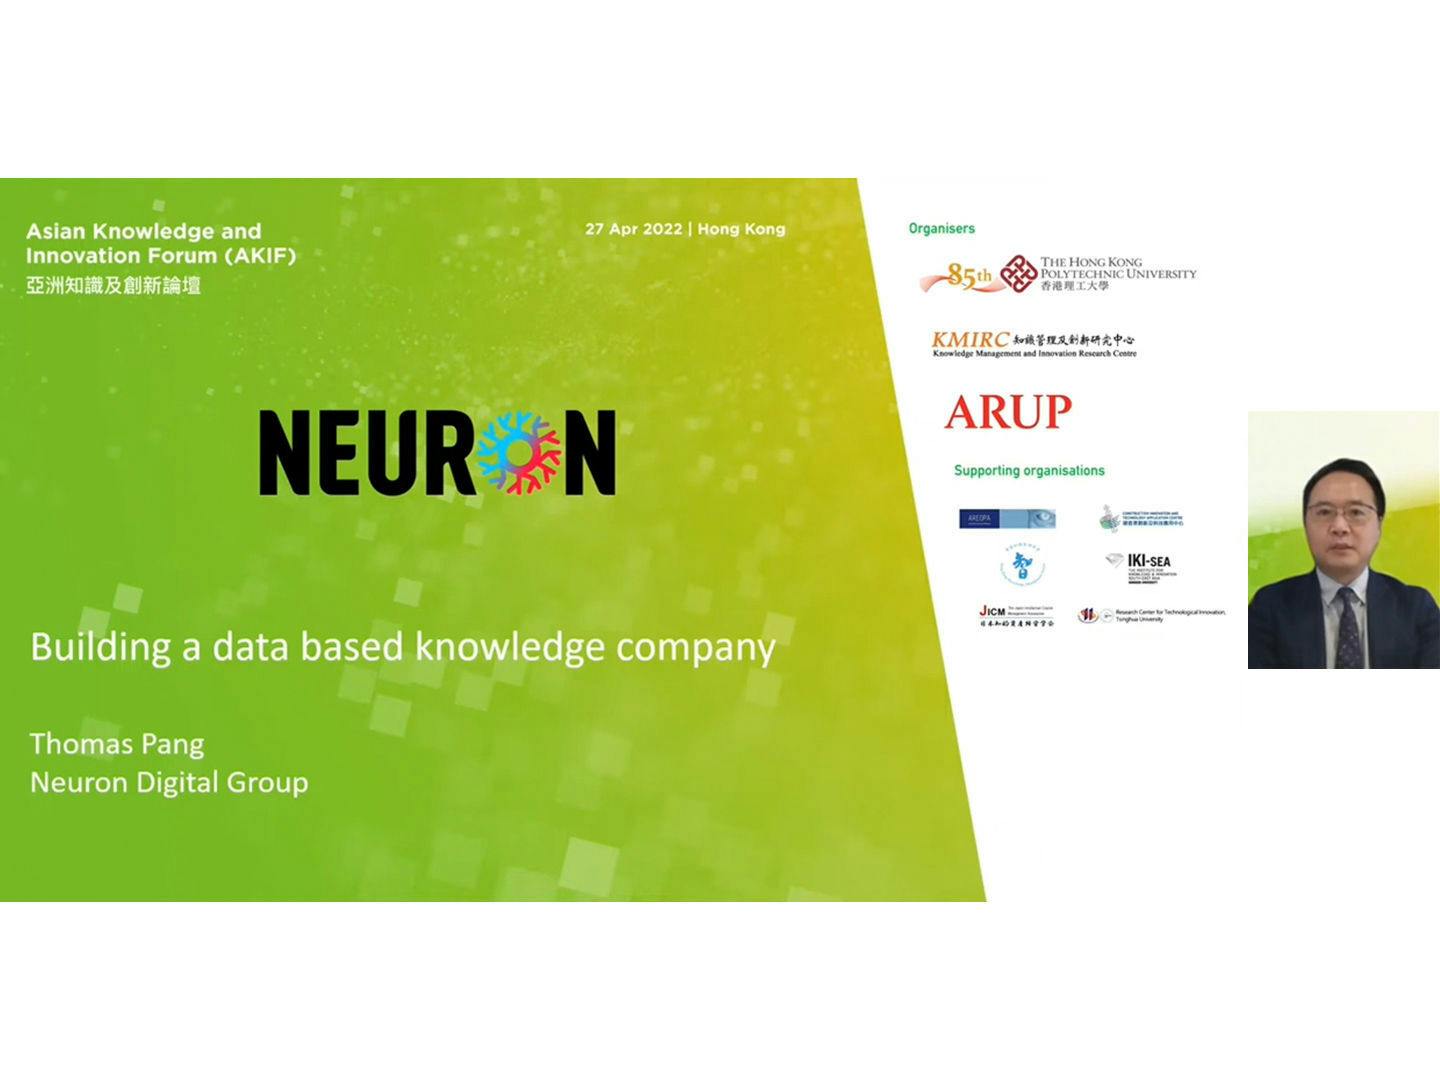 Asian Knowledge and Innovative Forum (AKIF) 2022 - Neuron Digital Group